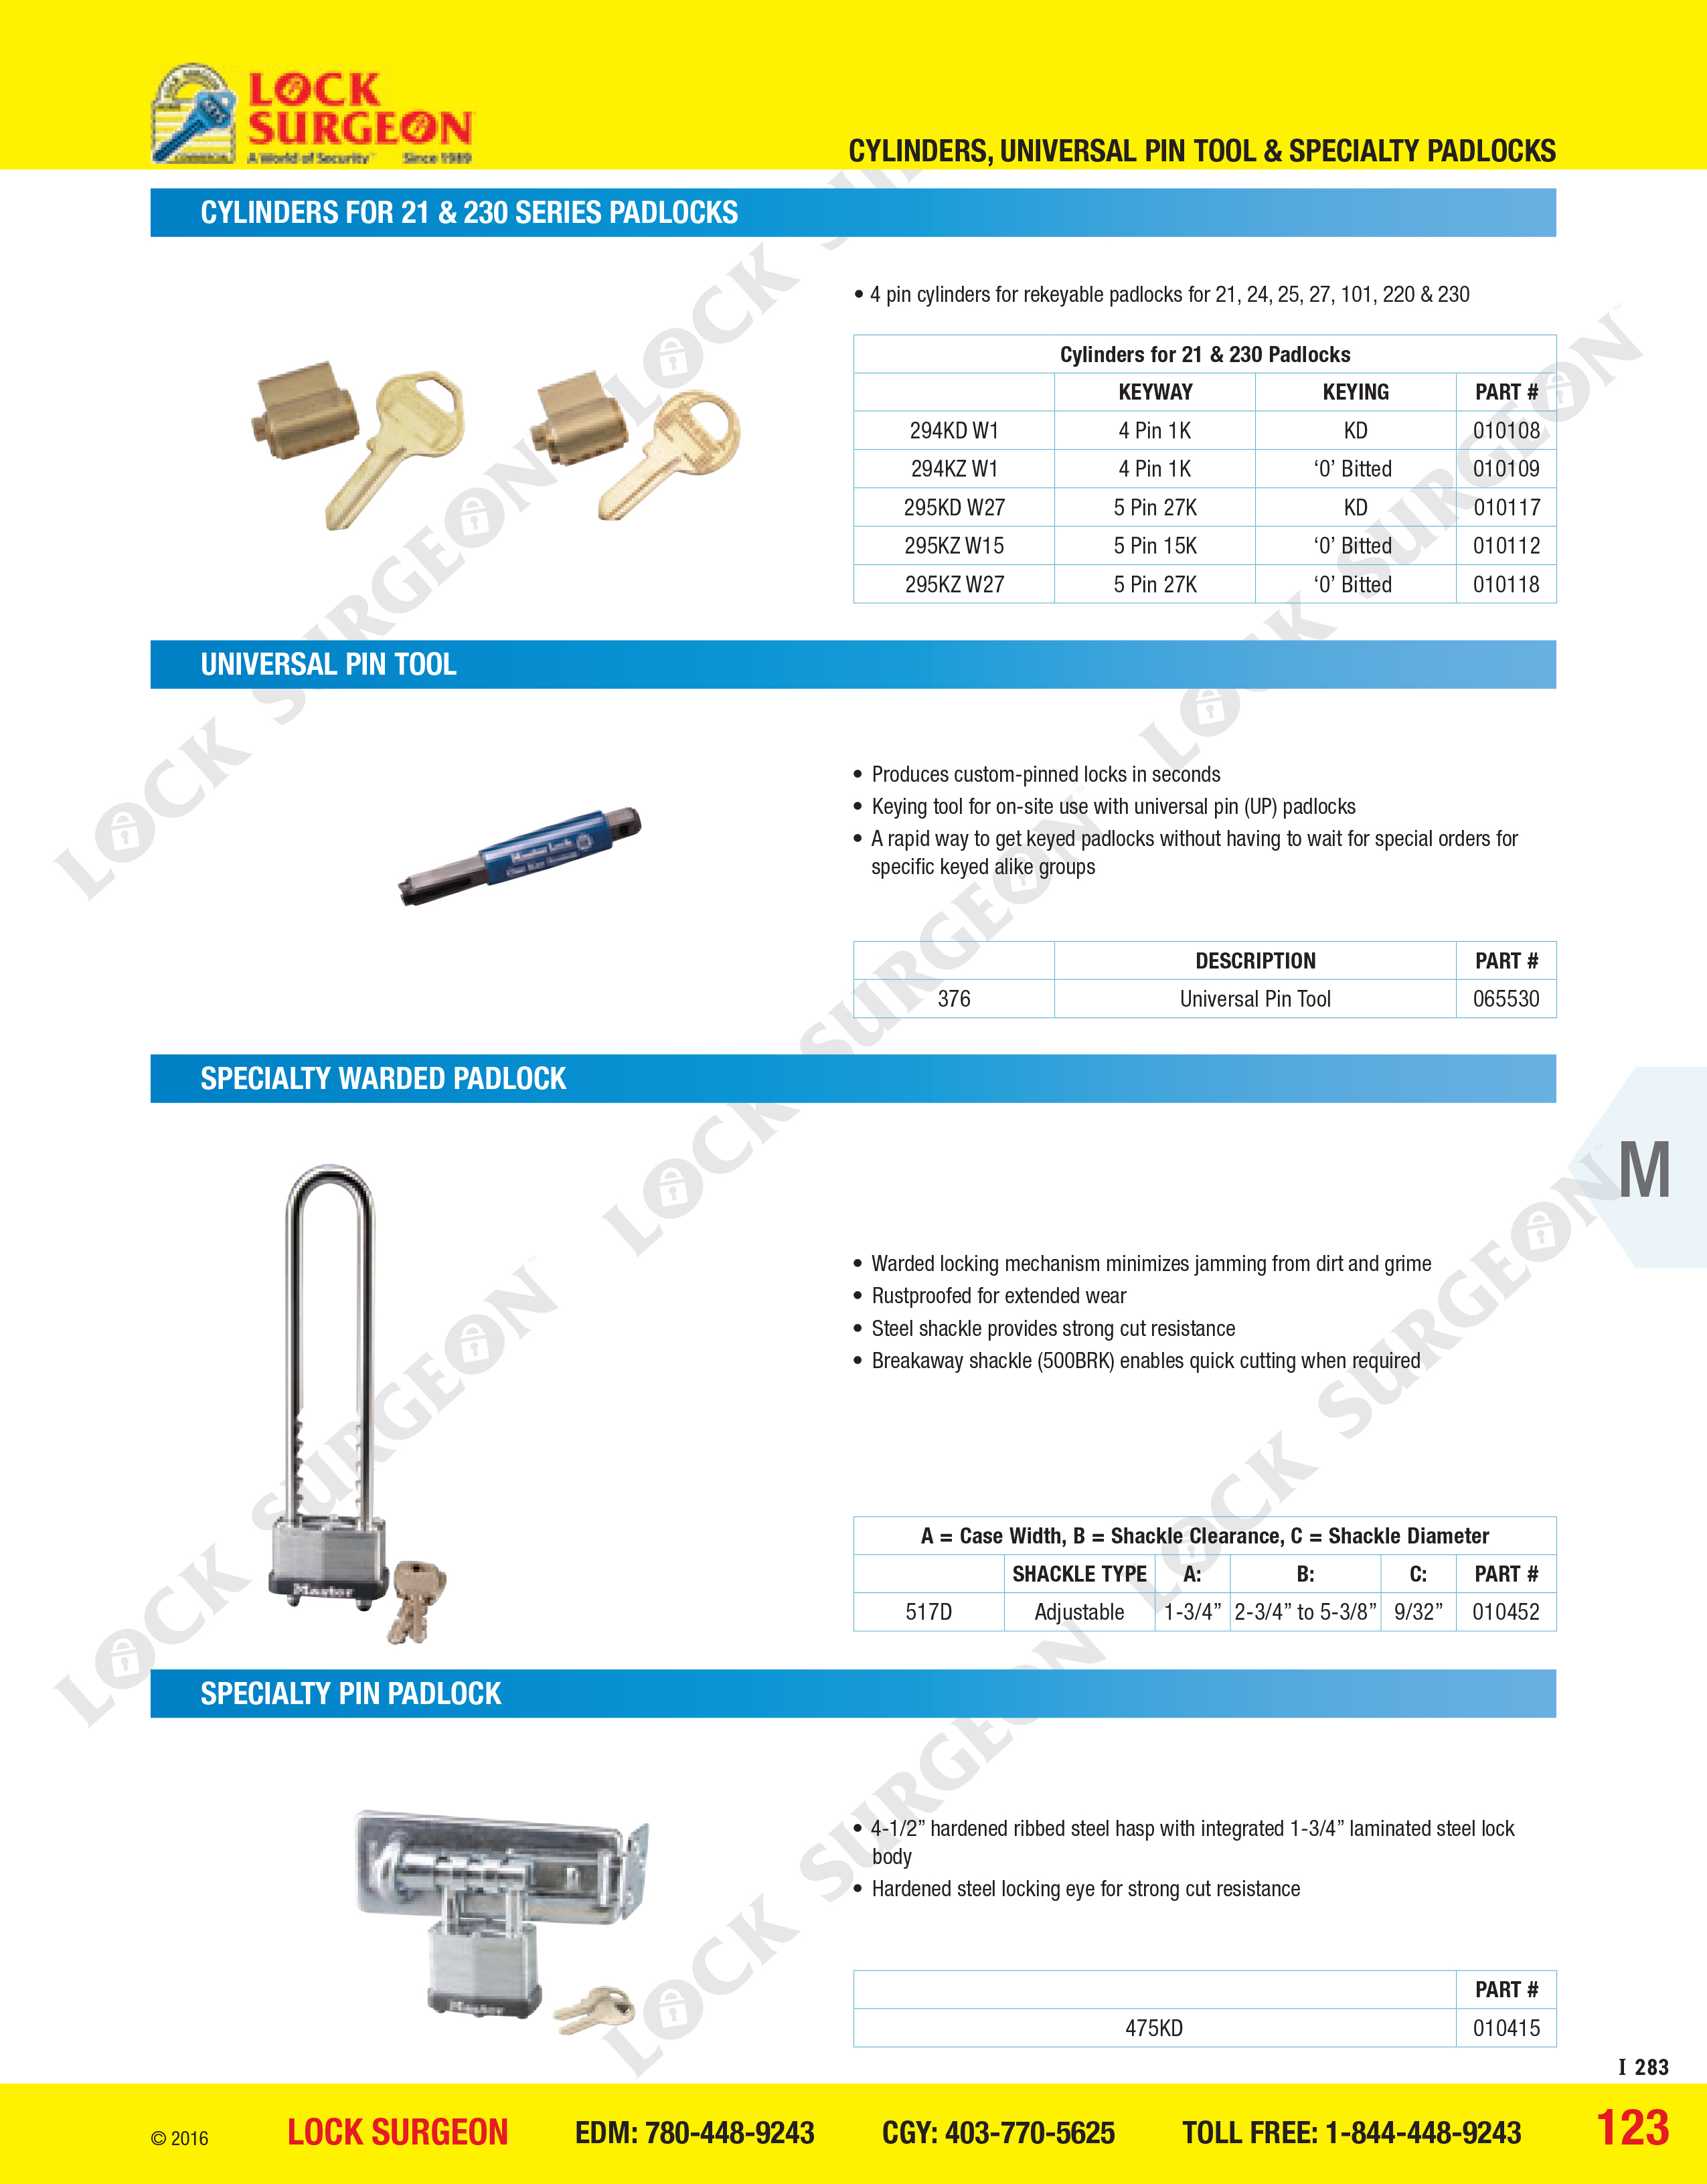 Cylinders for 21 and 230 series padlocks, universal pin tool, specialty warded padlock and specialty pin padlock